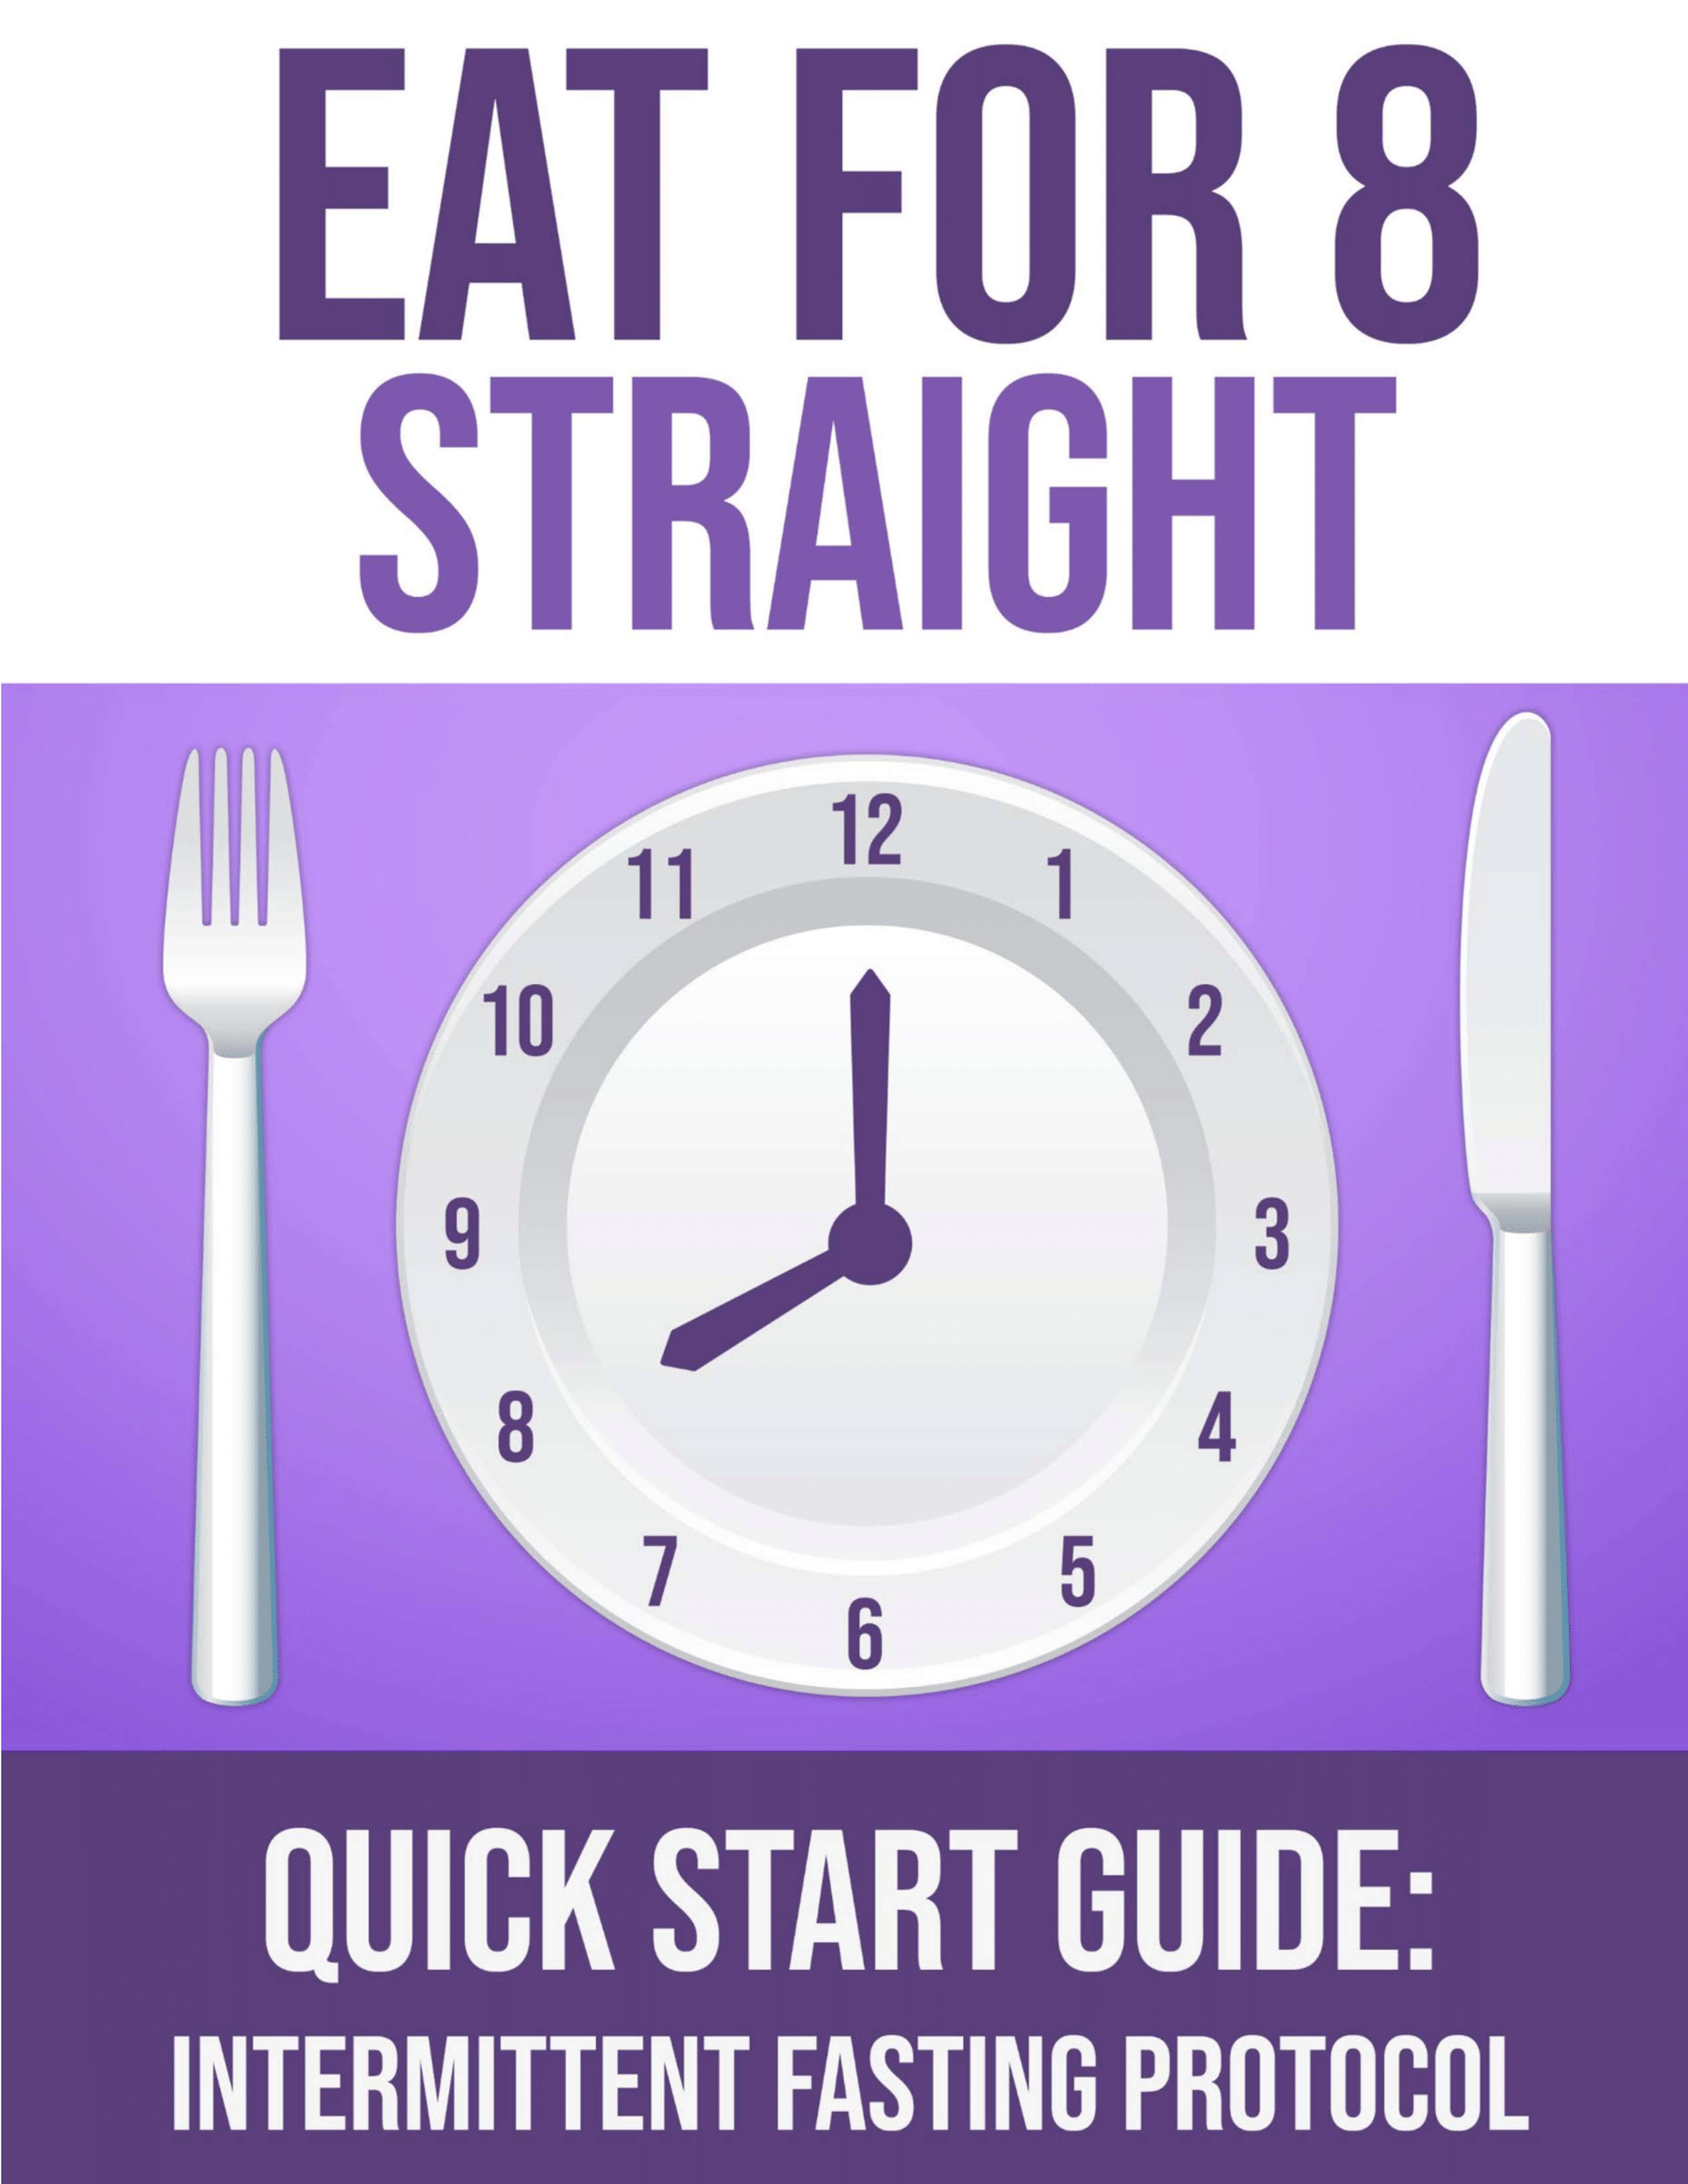 Eat for 8 straight ebook cover